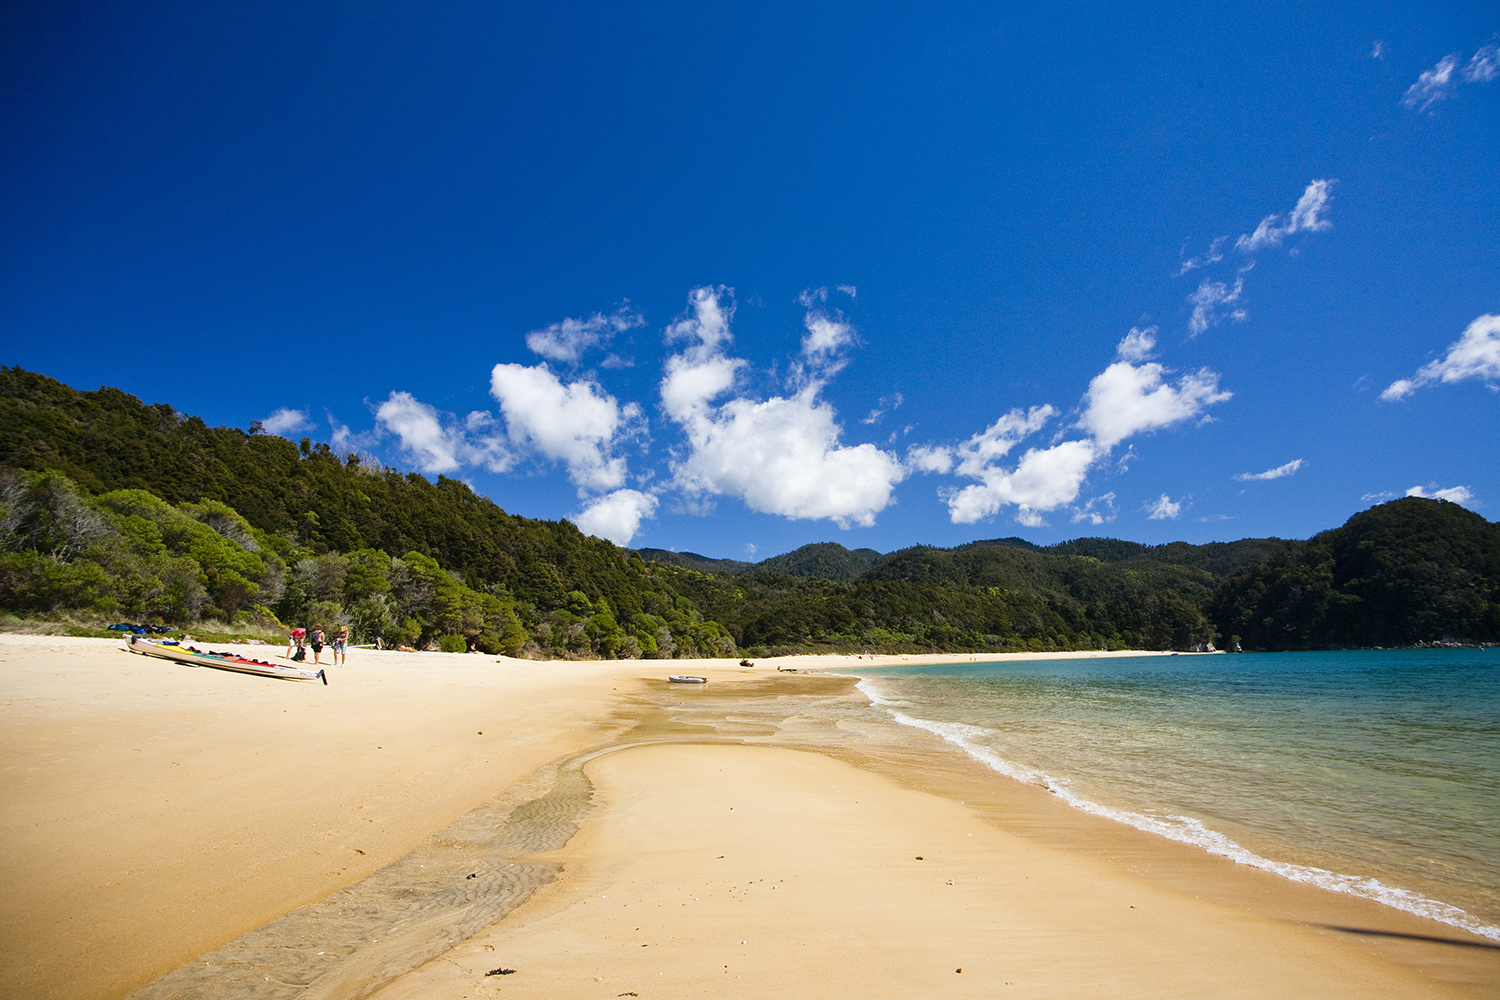 Be dazzled by Anchorage beach in New Zealand's Abel Tasman National Park. Image by Matthew Micah Wright / Lonely Planet Images / Getty Images